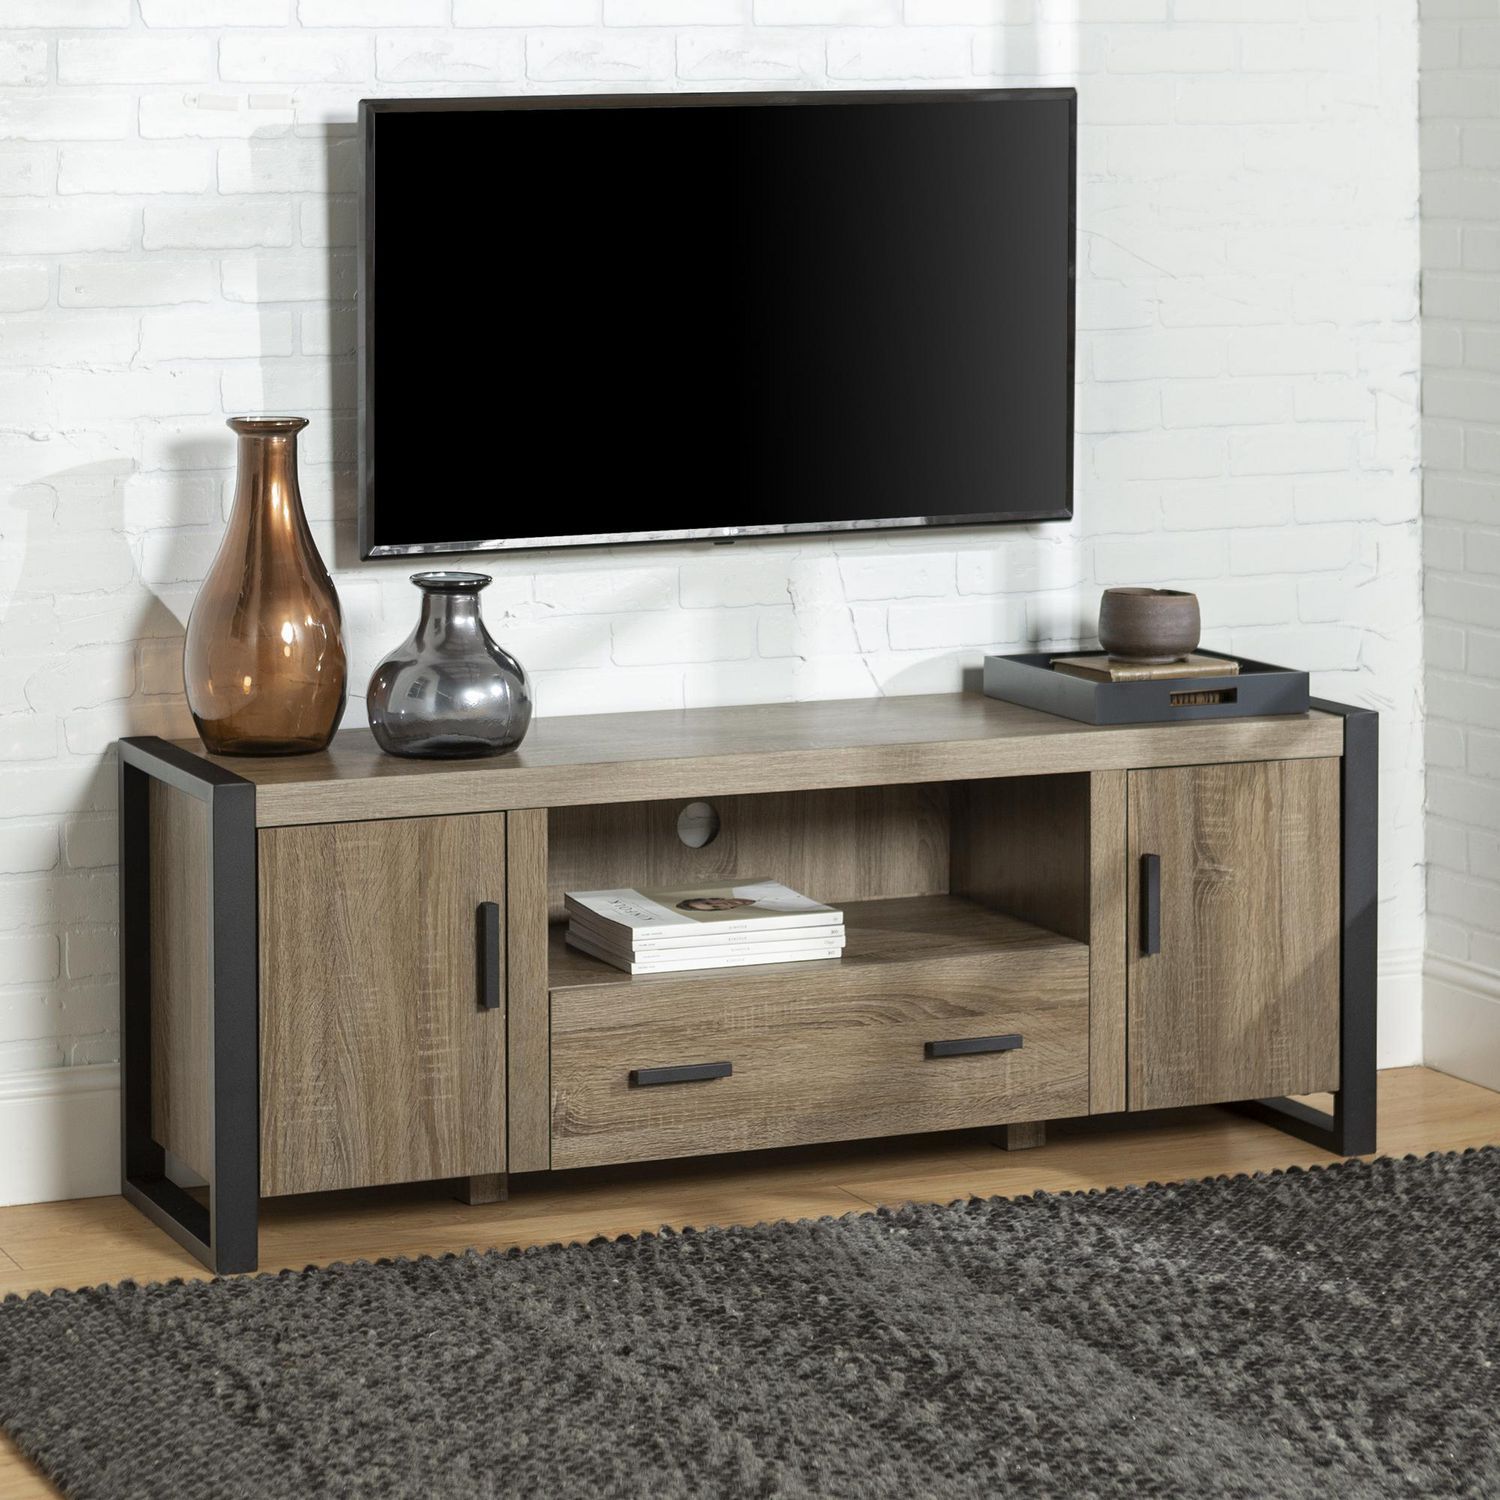 Manor Park Modern Industrial Tv Stand – Multiple Finishes For Tv Stands With Led Lights In Multiple Finishes (View 4 of 15)